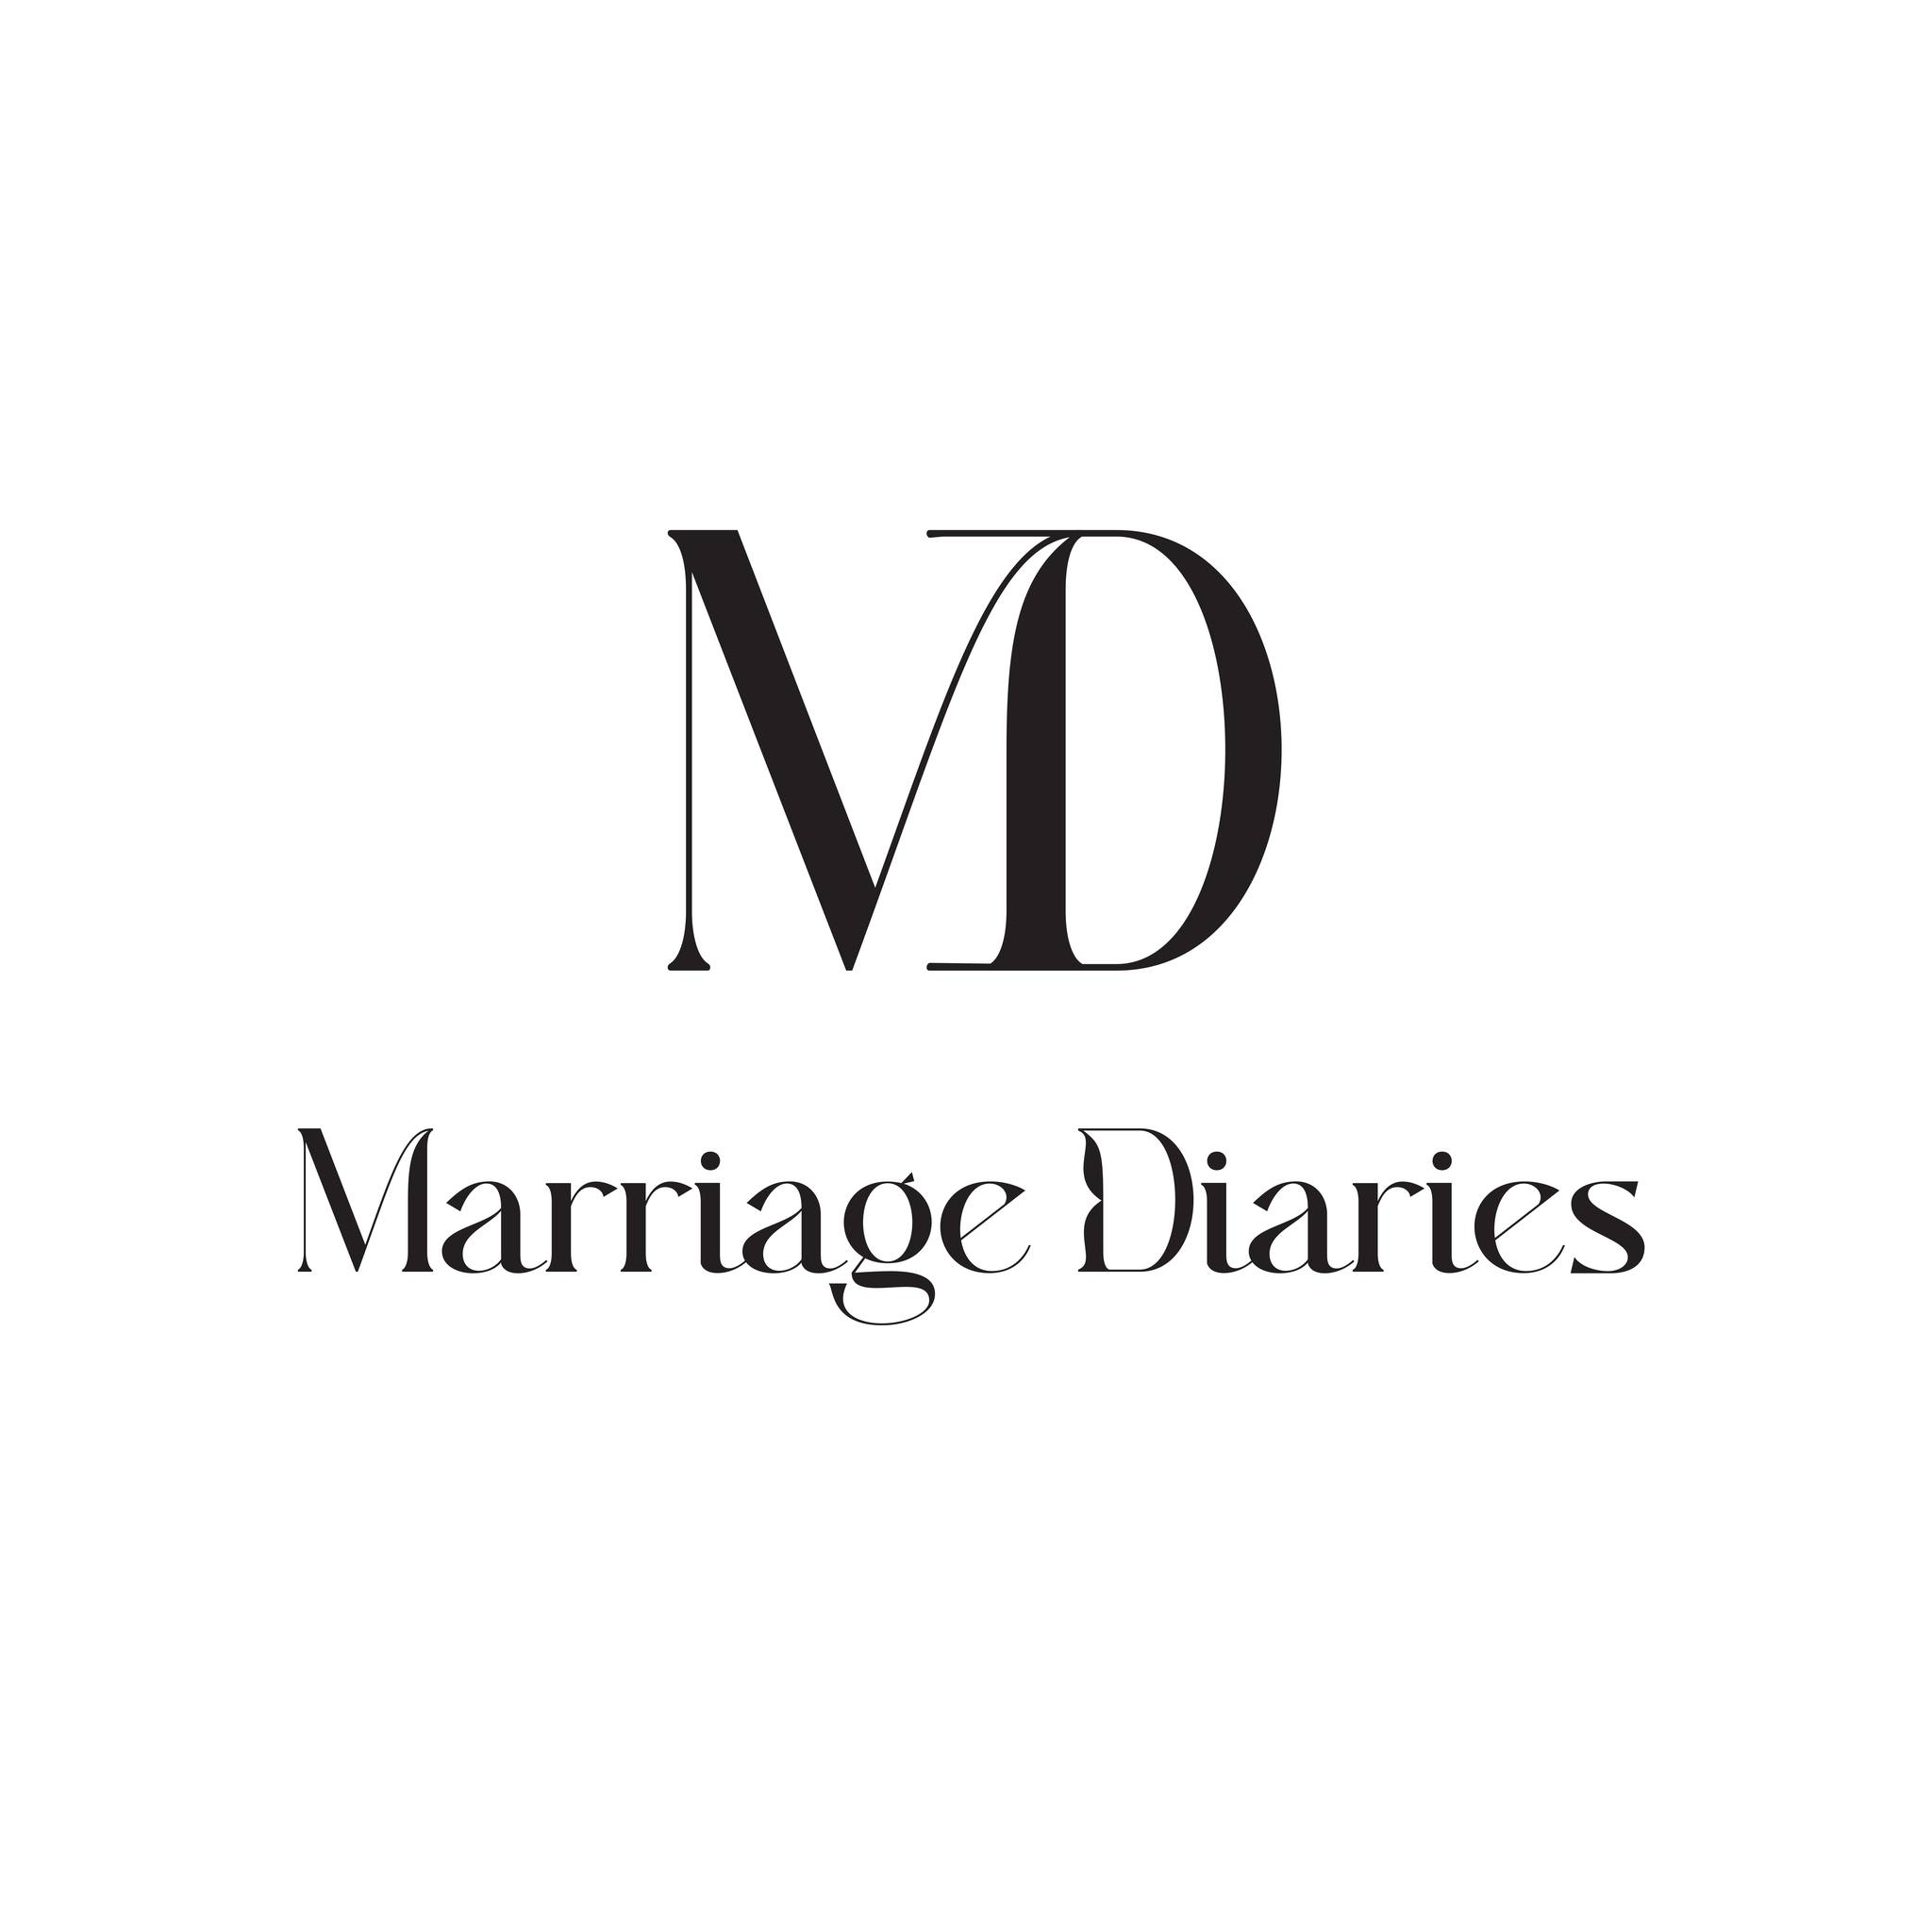 Marriage Diaries